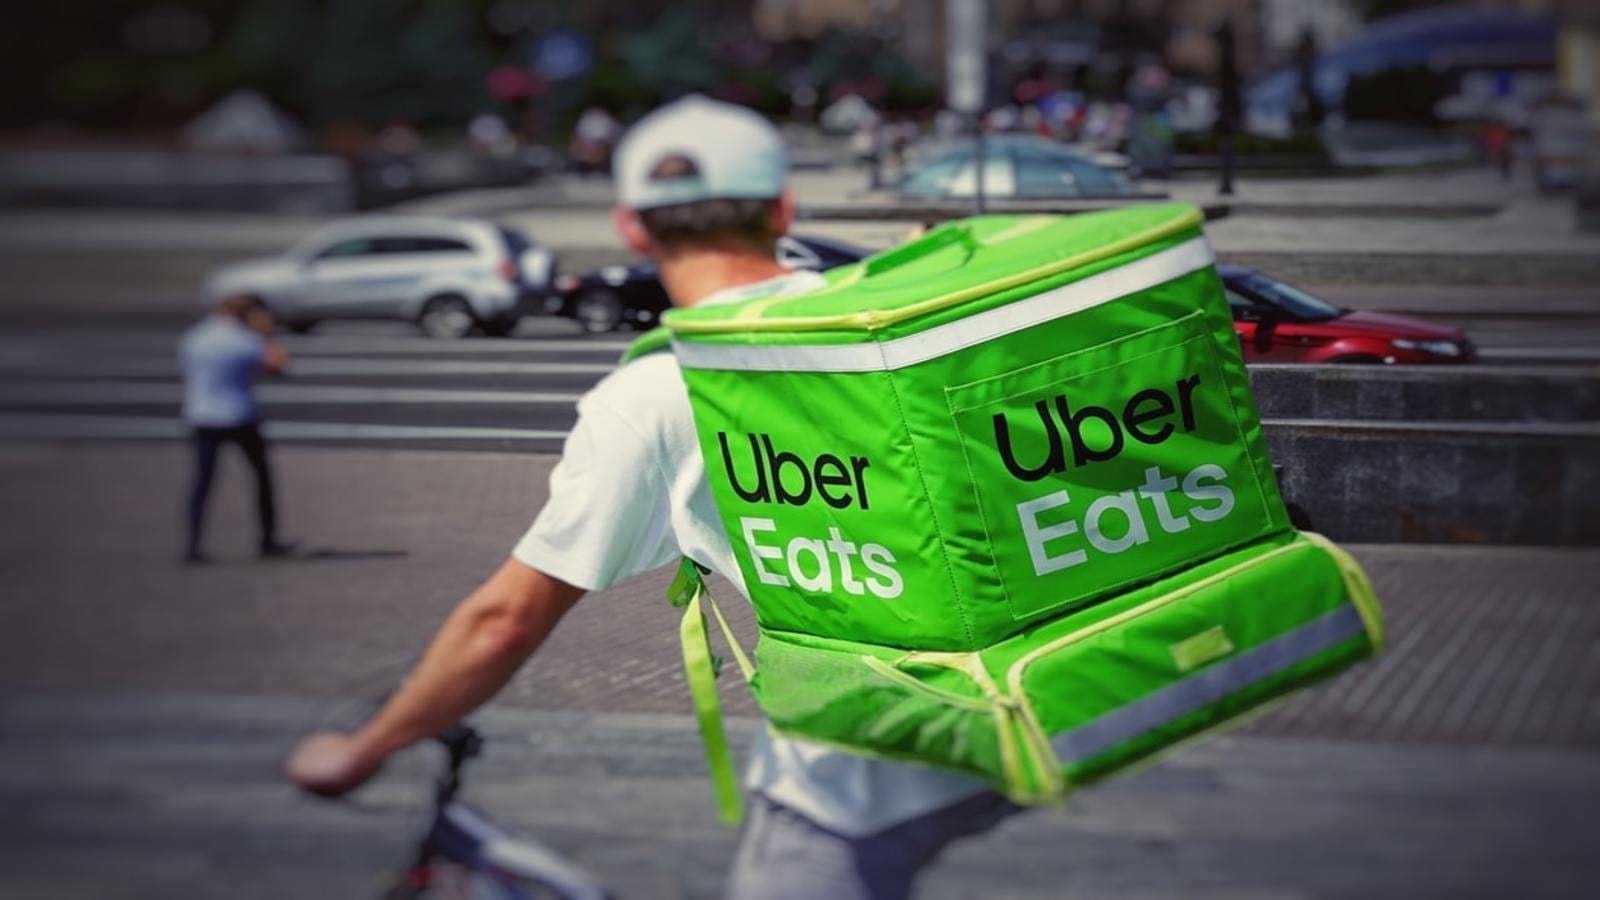 Uber food delivery business rides on increased at-home consumption to outshine core rides services